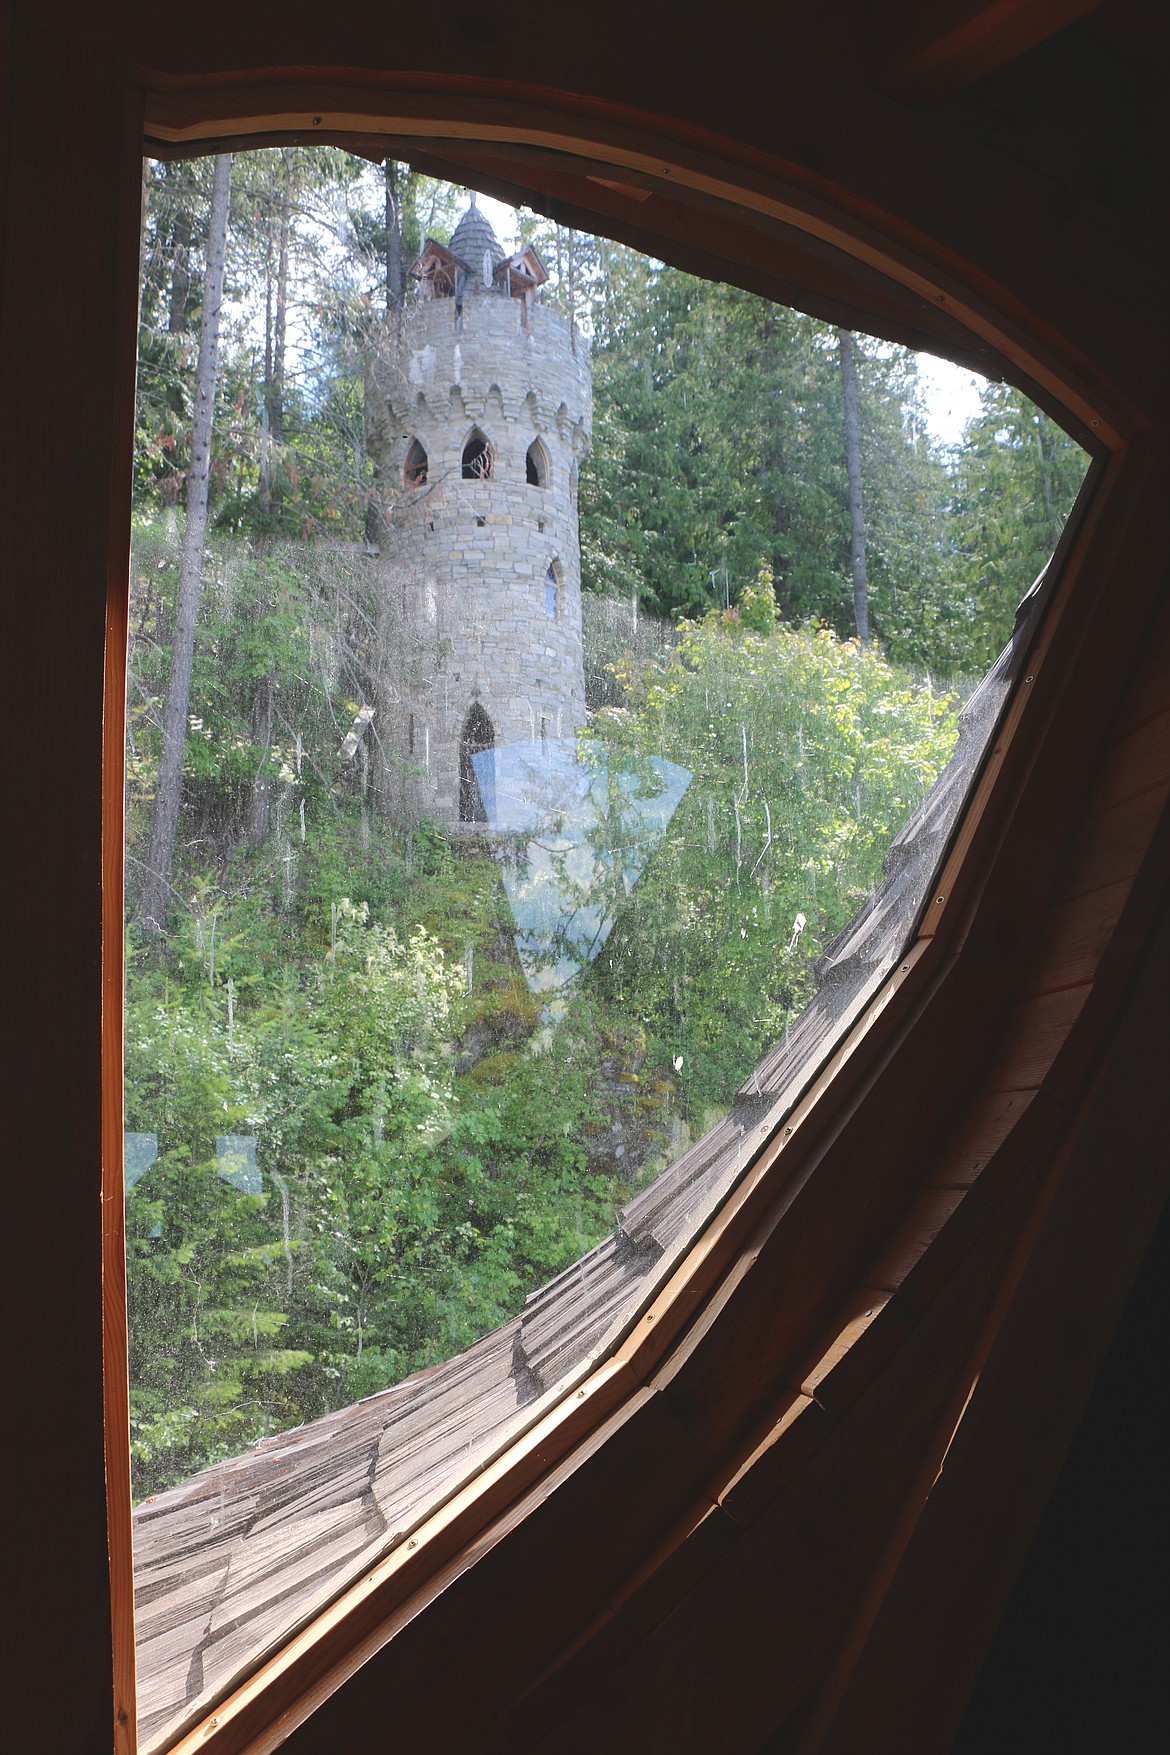 A view of a viewing tower from Castle Von Fransen. Constructed by the History Channel for the current owner as a gift, the tower provides stunning views of Lake Pend Oreille.